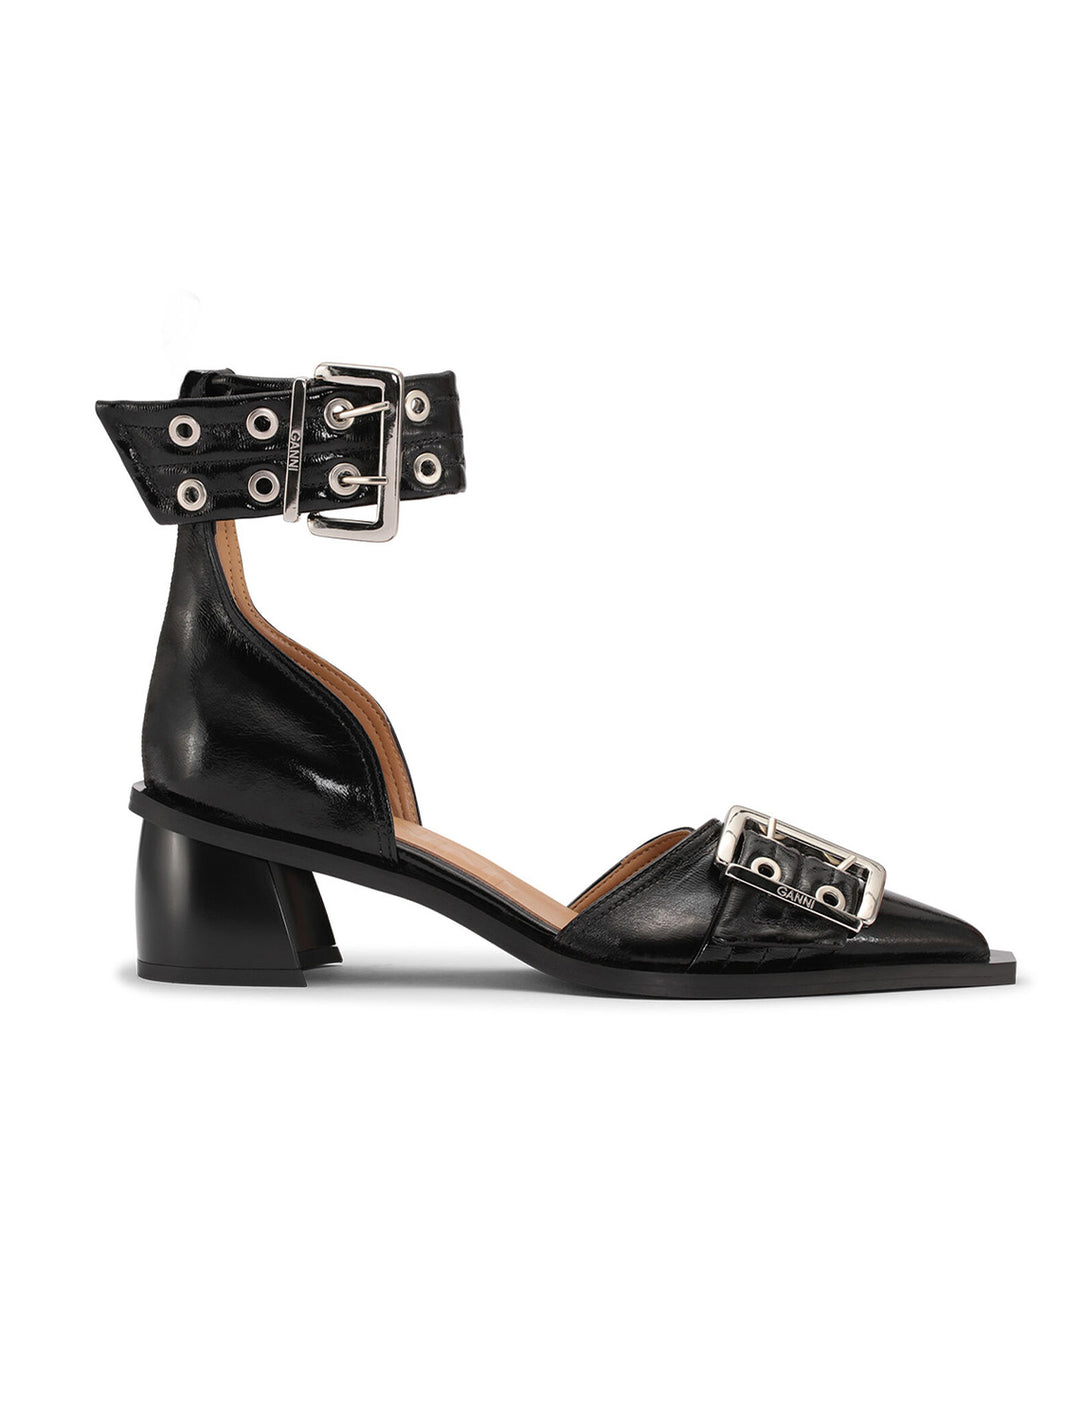 Side view of GANNI's chunky buckle open cut pump naplack.